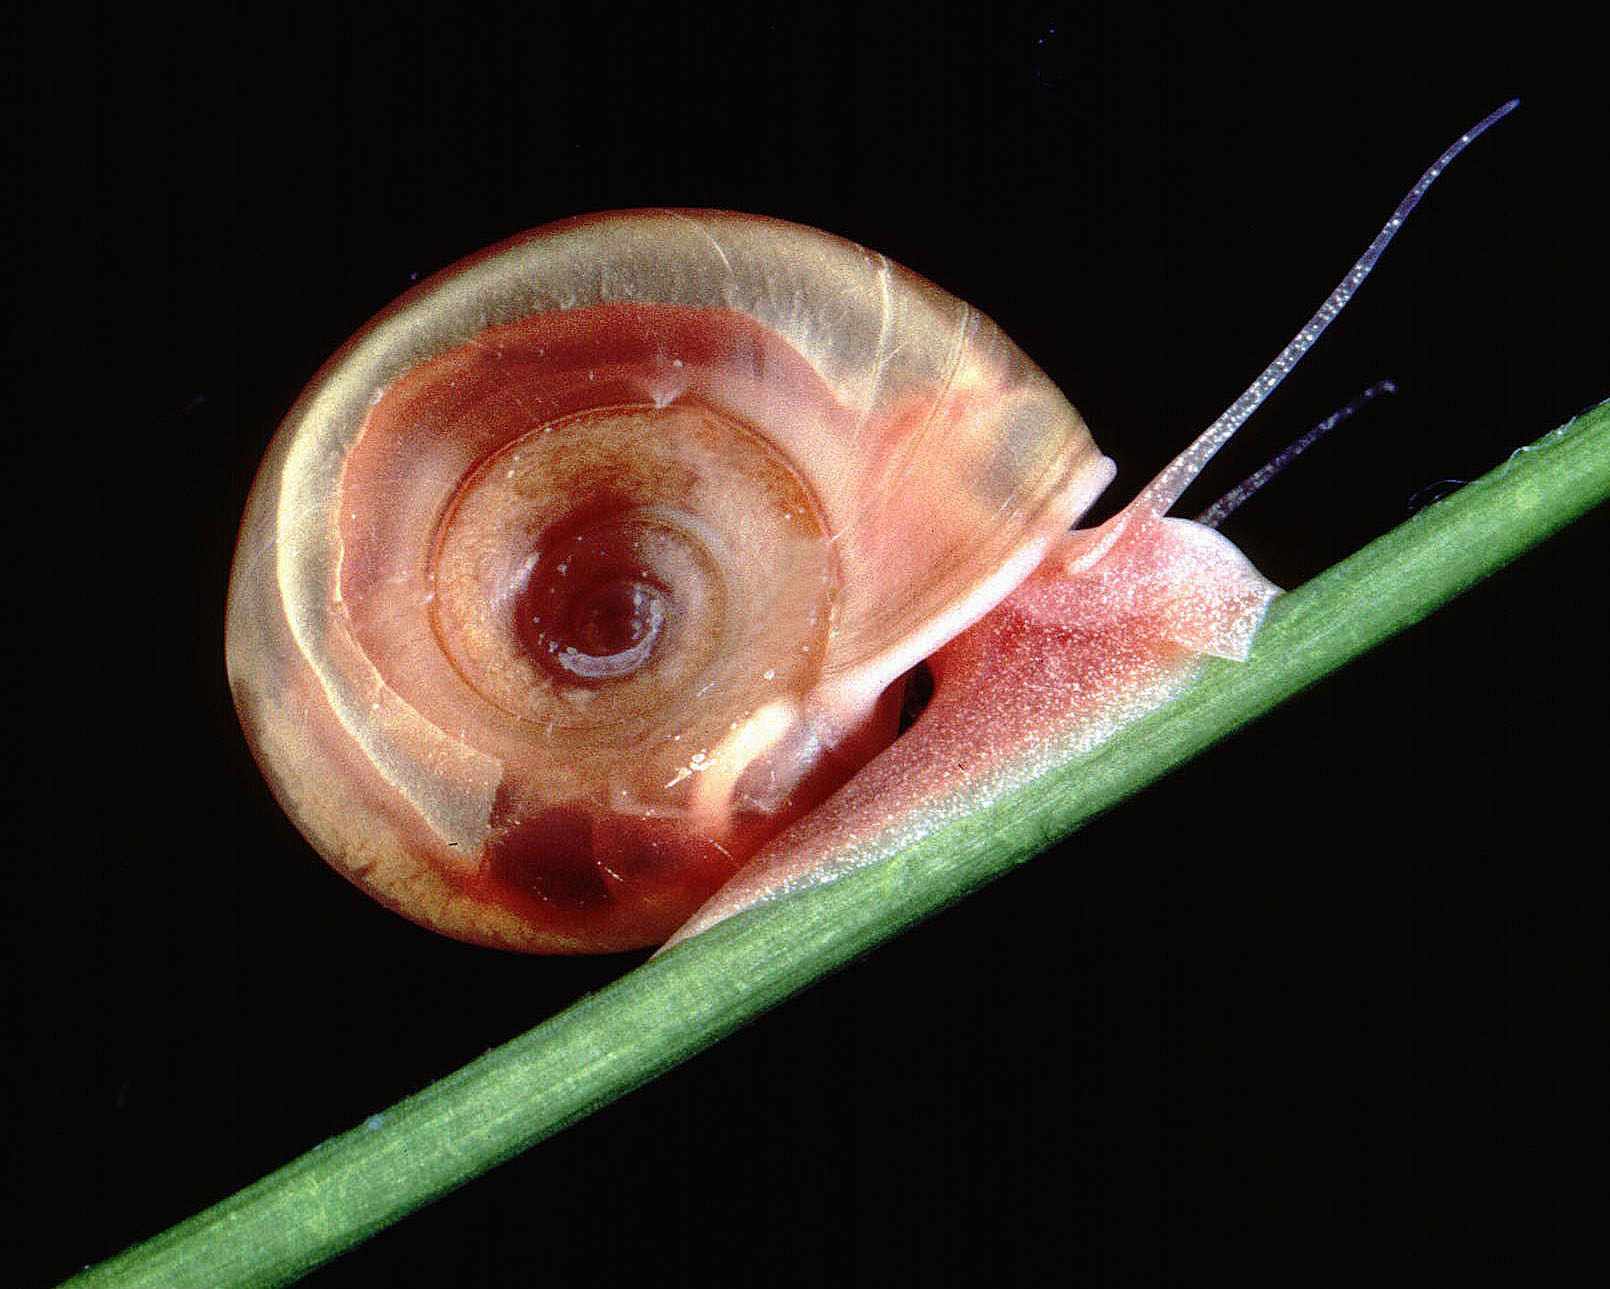 A Creative Approach to Controlling a Deadly Snail - Science Friday